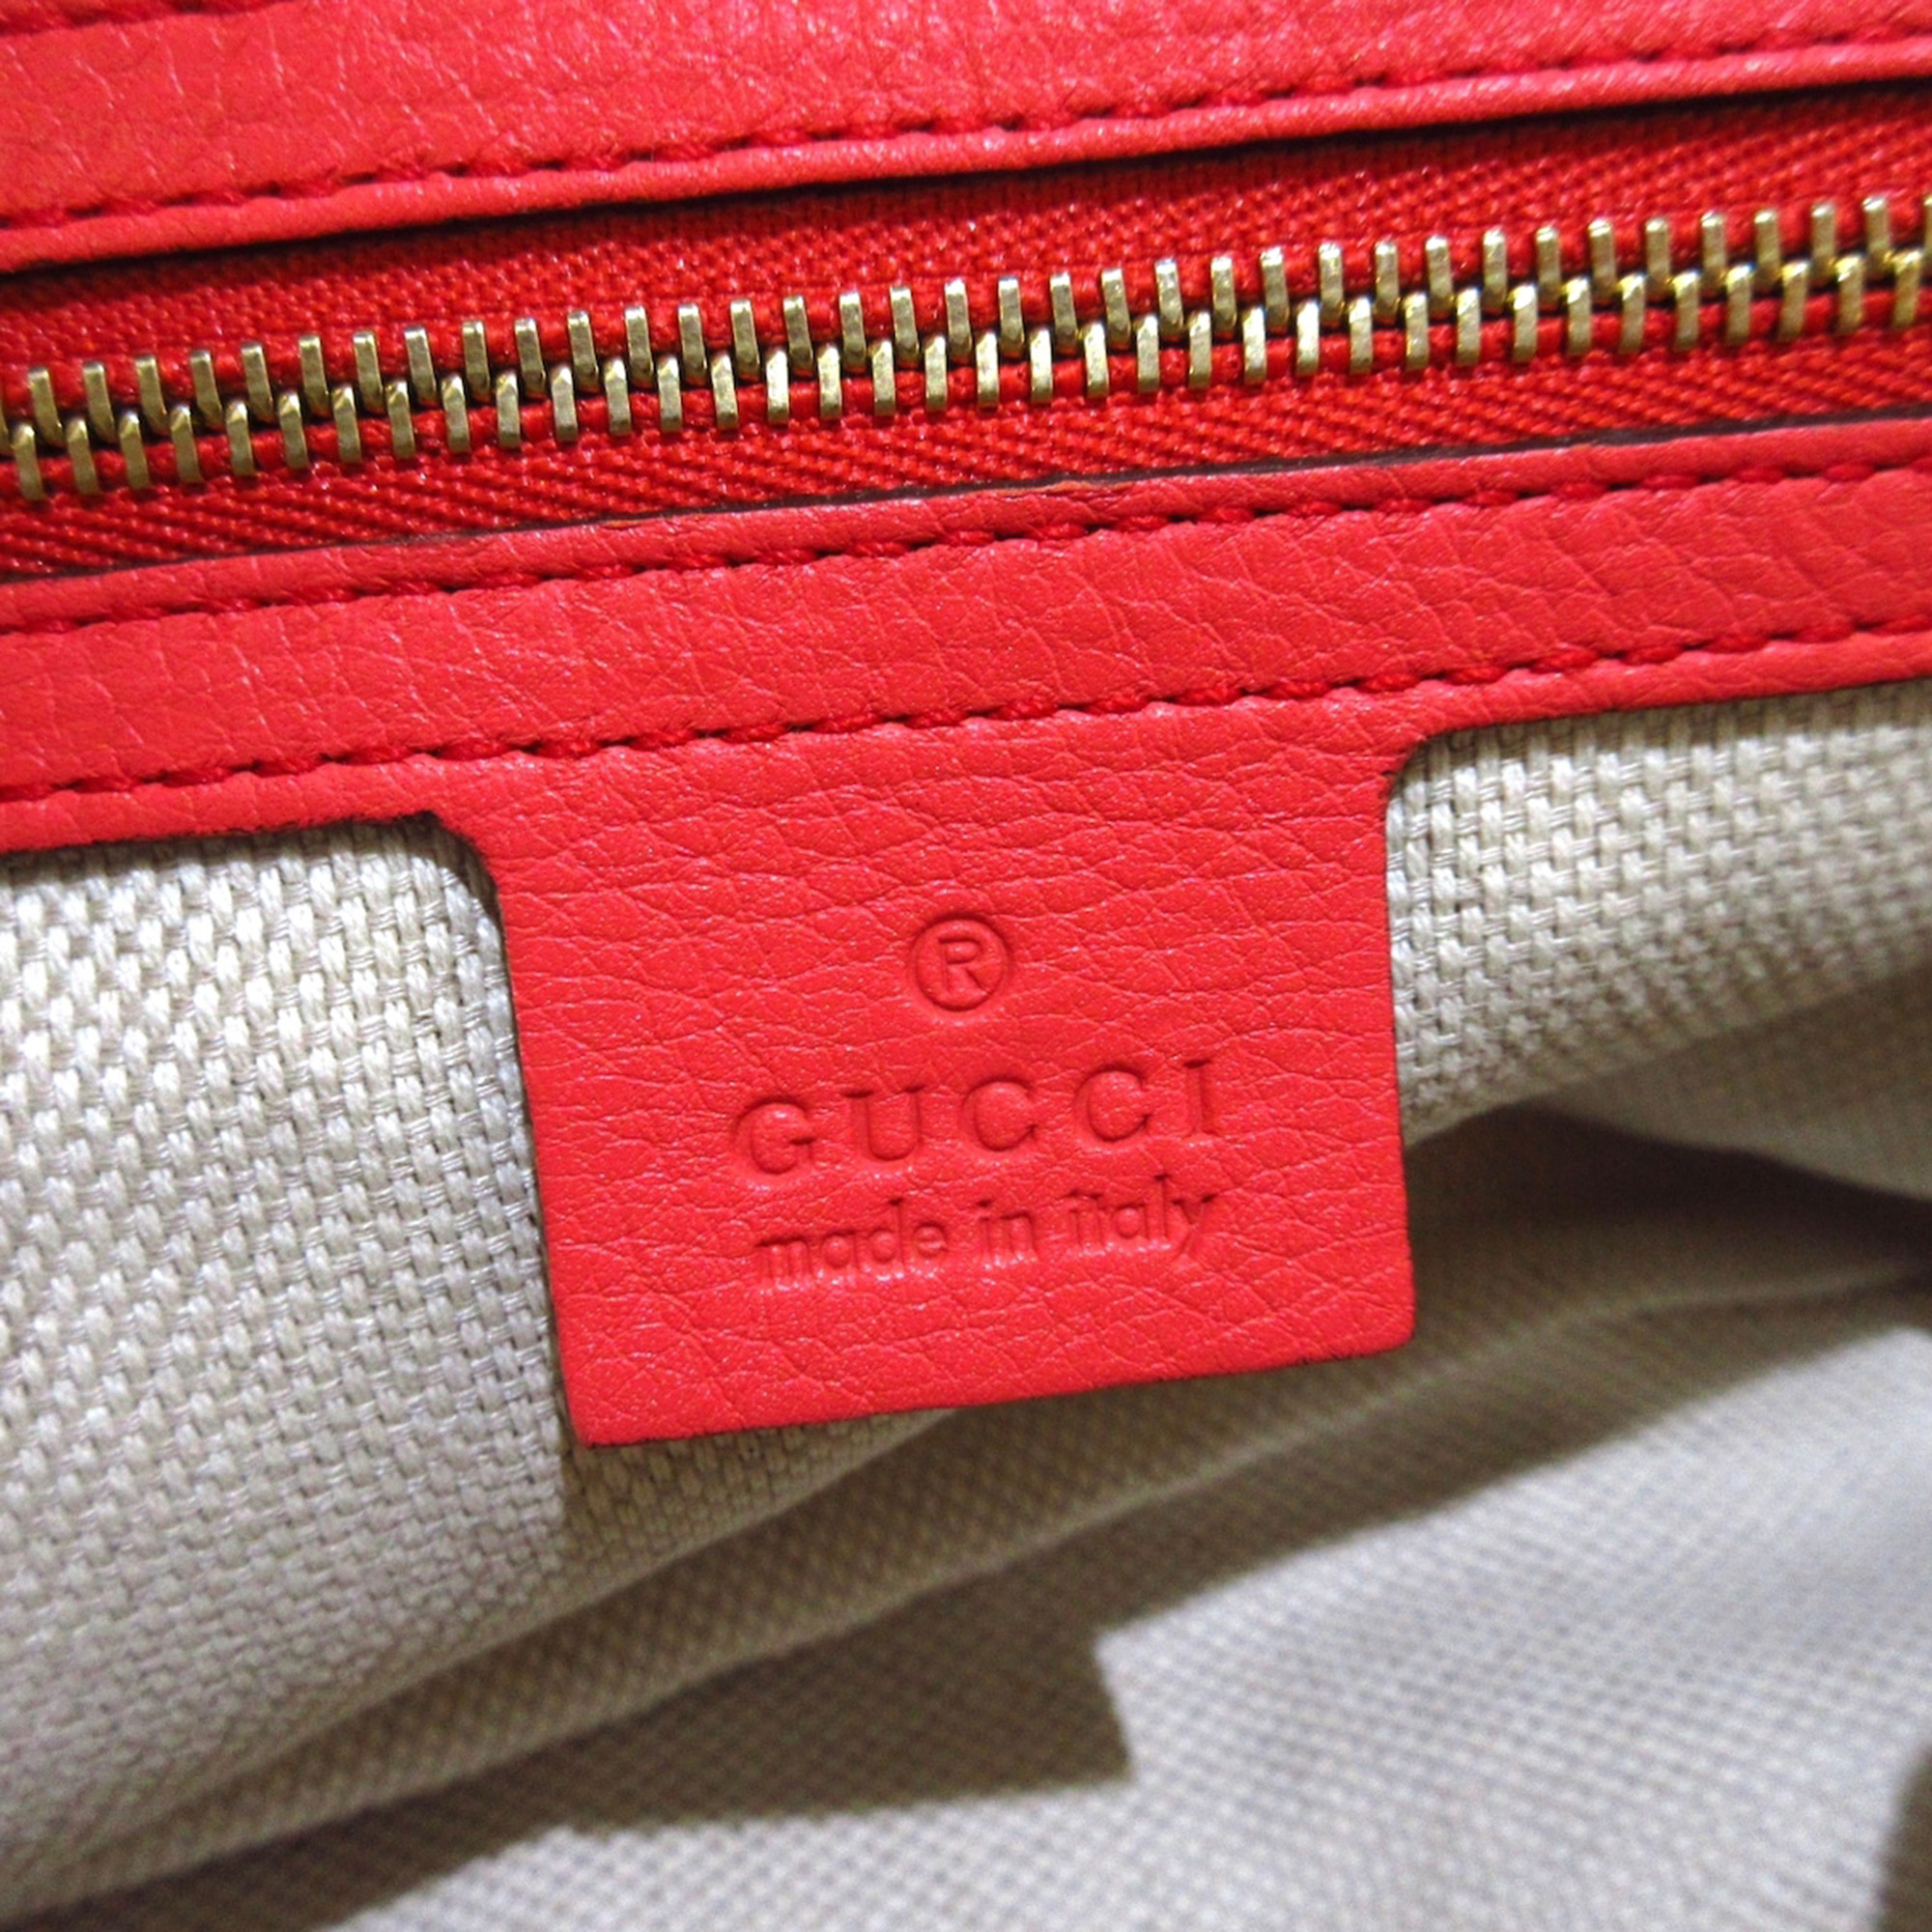 Gucci Red Leather Soho Chain Shoulder Bag